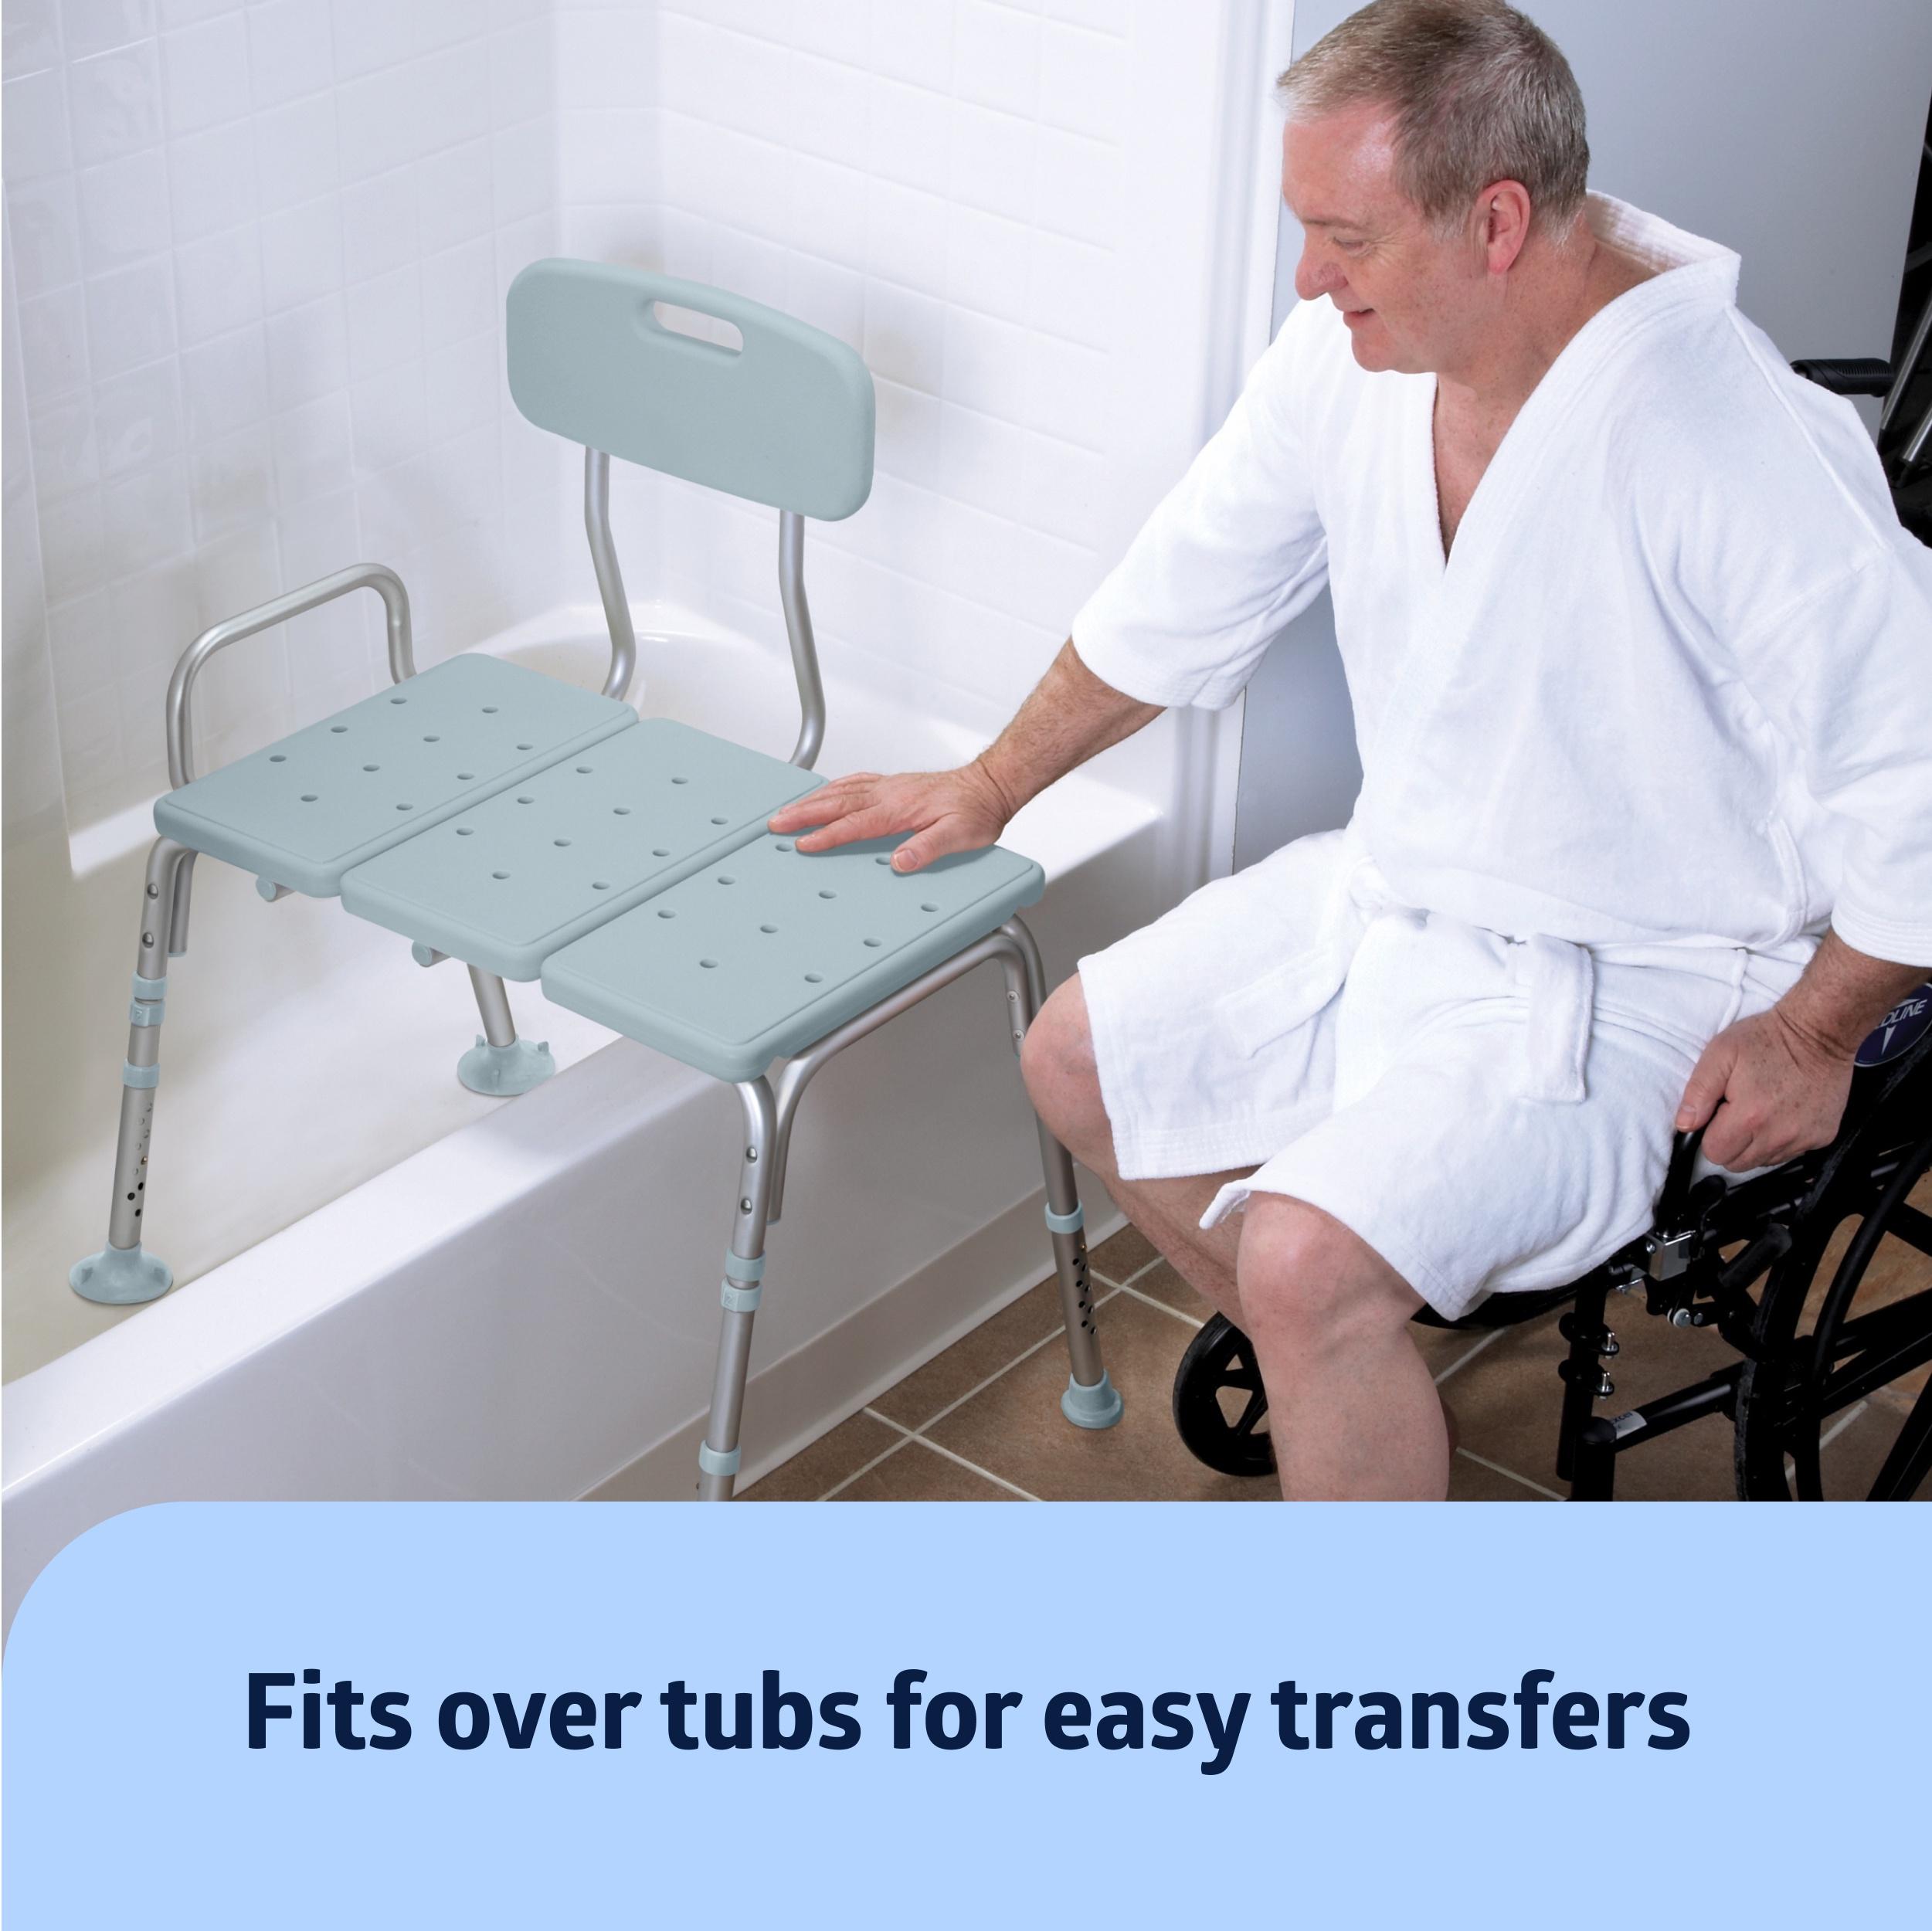 Medline Tub Transfer Bench and Shower Chair with Microban, 350lb Weight Capacity, Blue - image 5 of 6